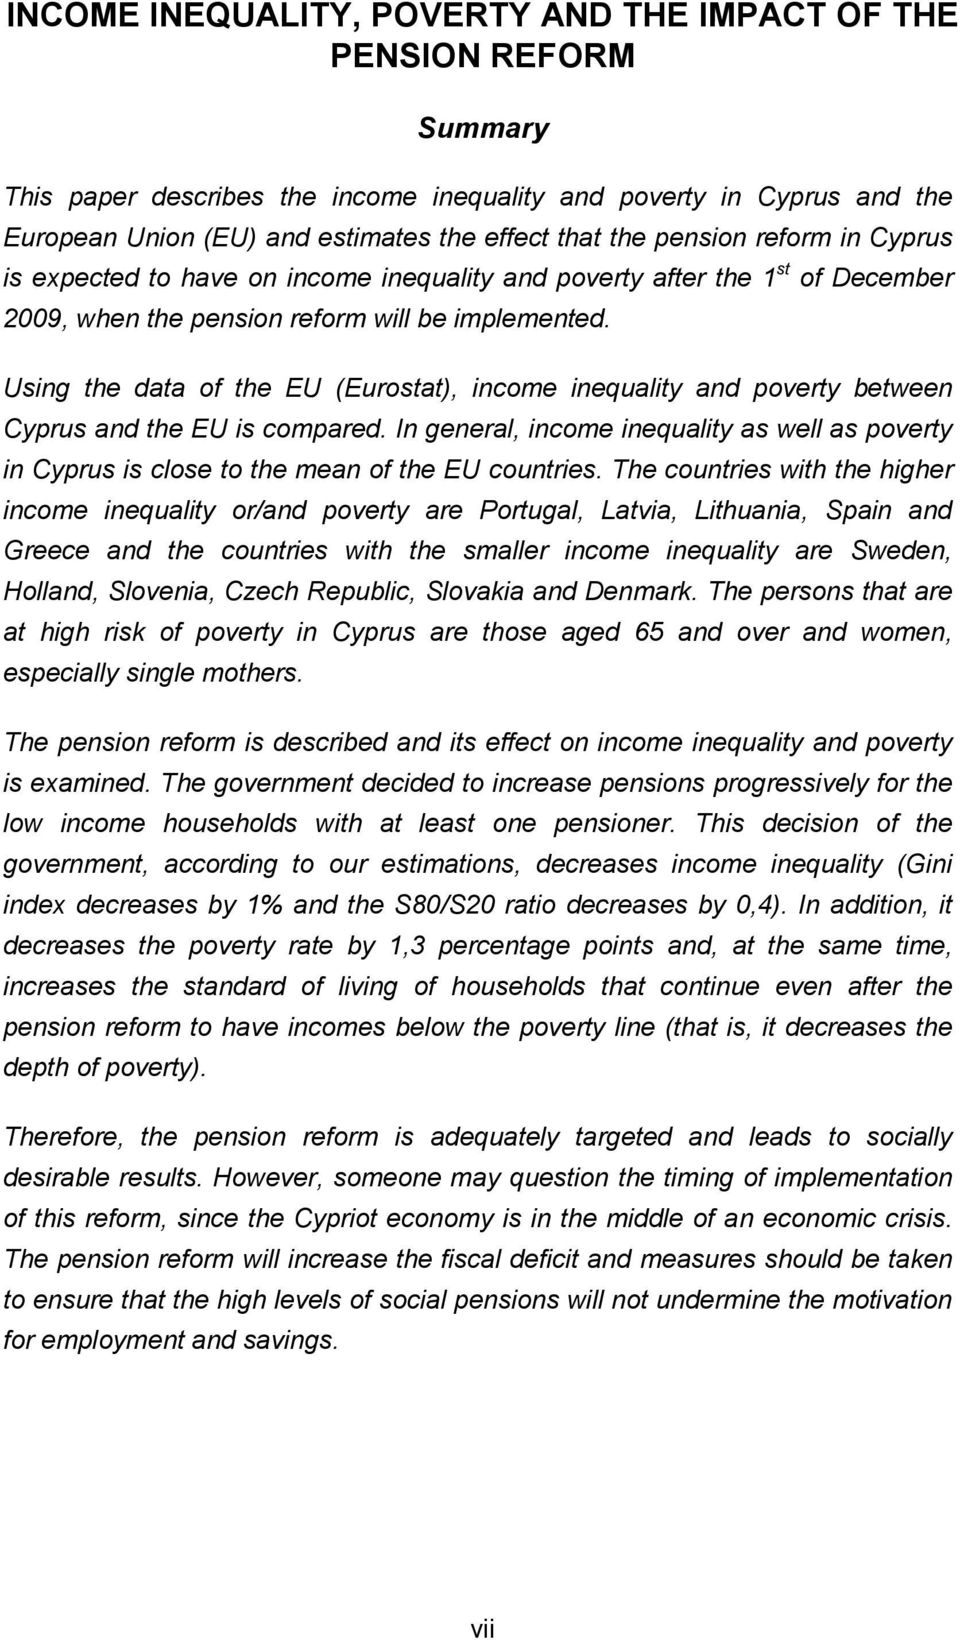 Using the data of the EU (Eurostat), income inequality and poverty between Cyprus and the EU is compared.